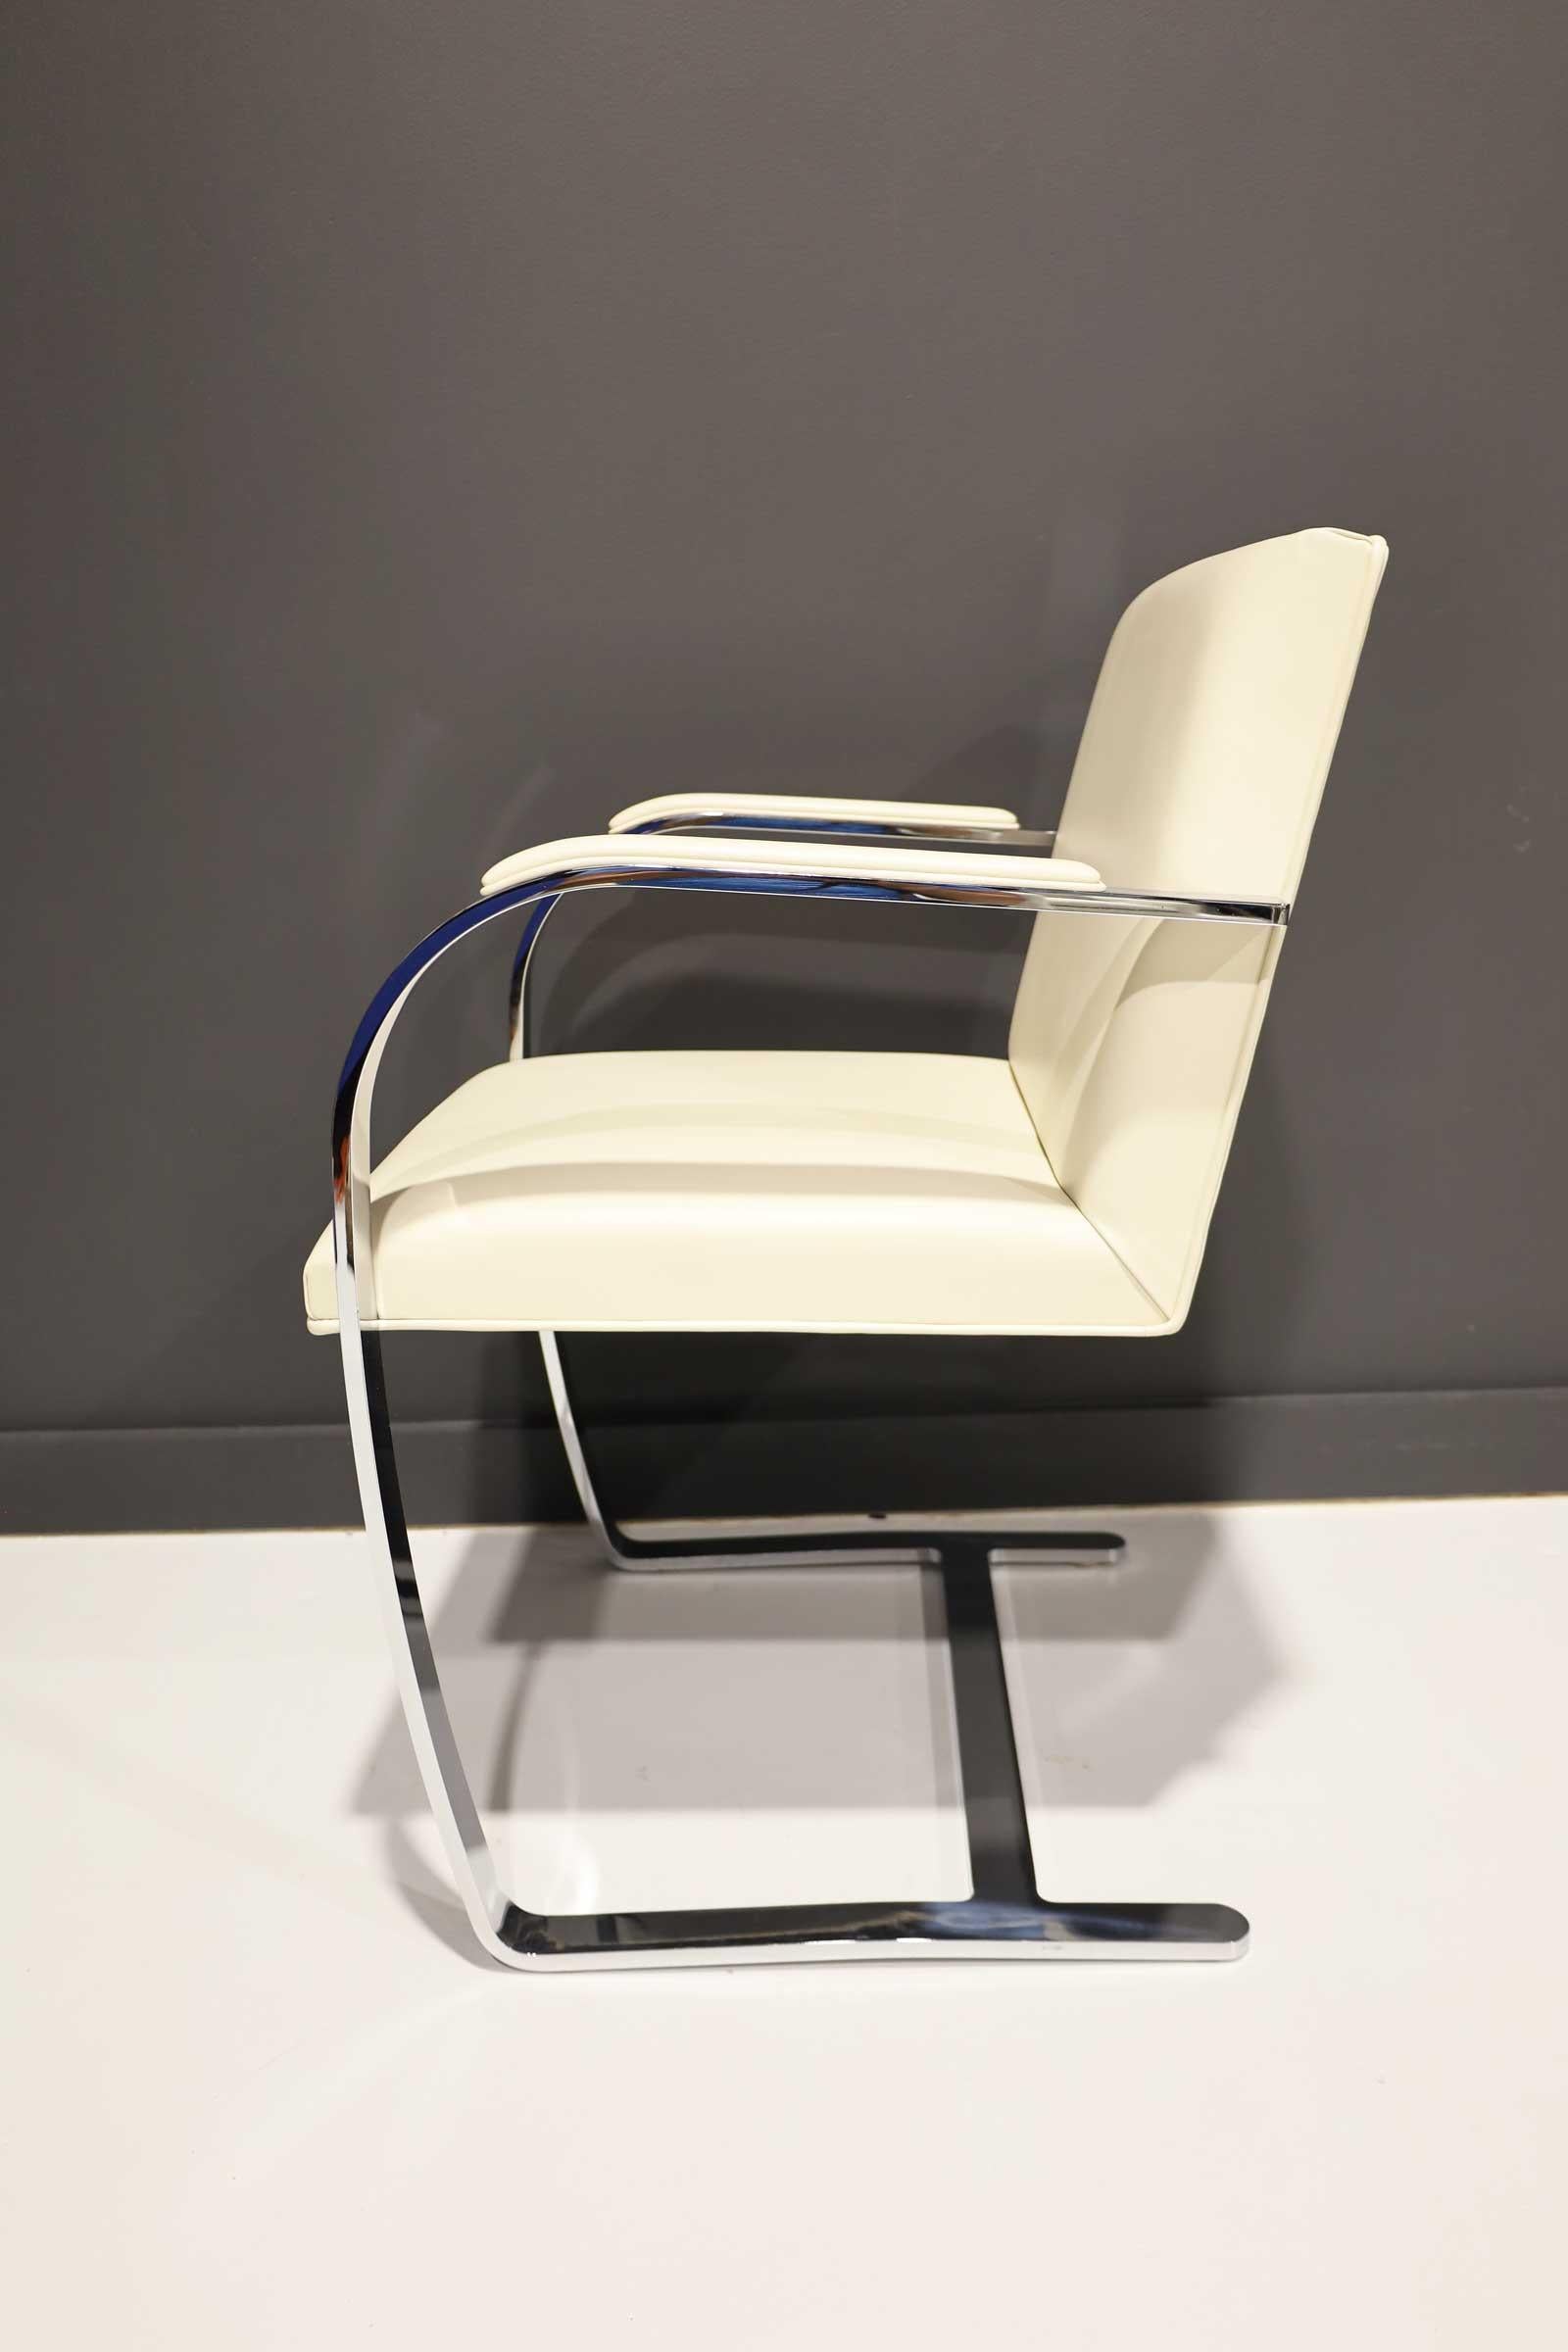 Mid-Century Modern Mies van der Rohe Stainless Steel Brno Chairs by Knoll in Sabrina Leather